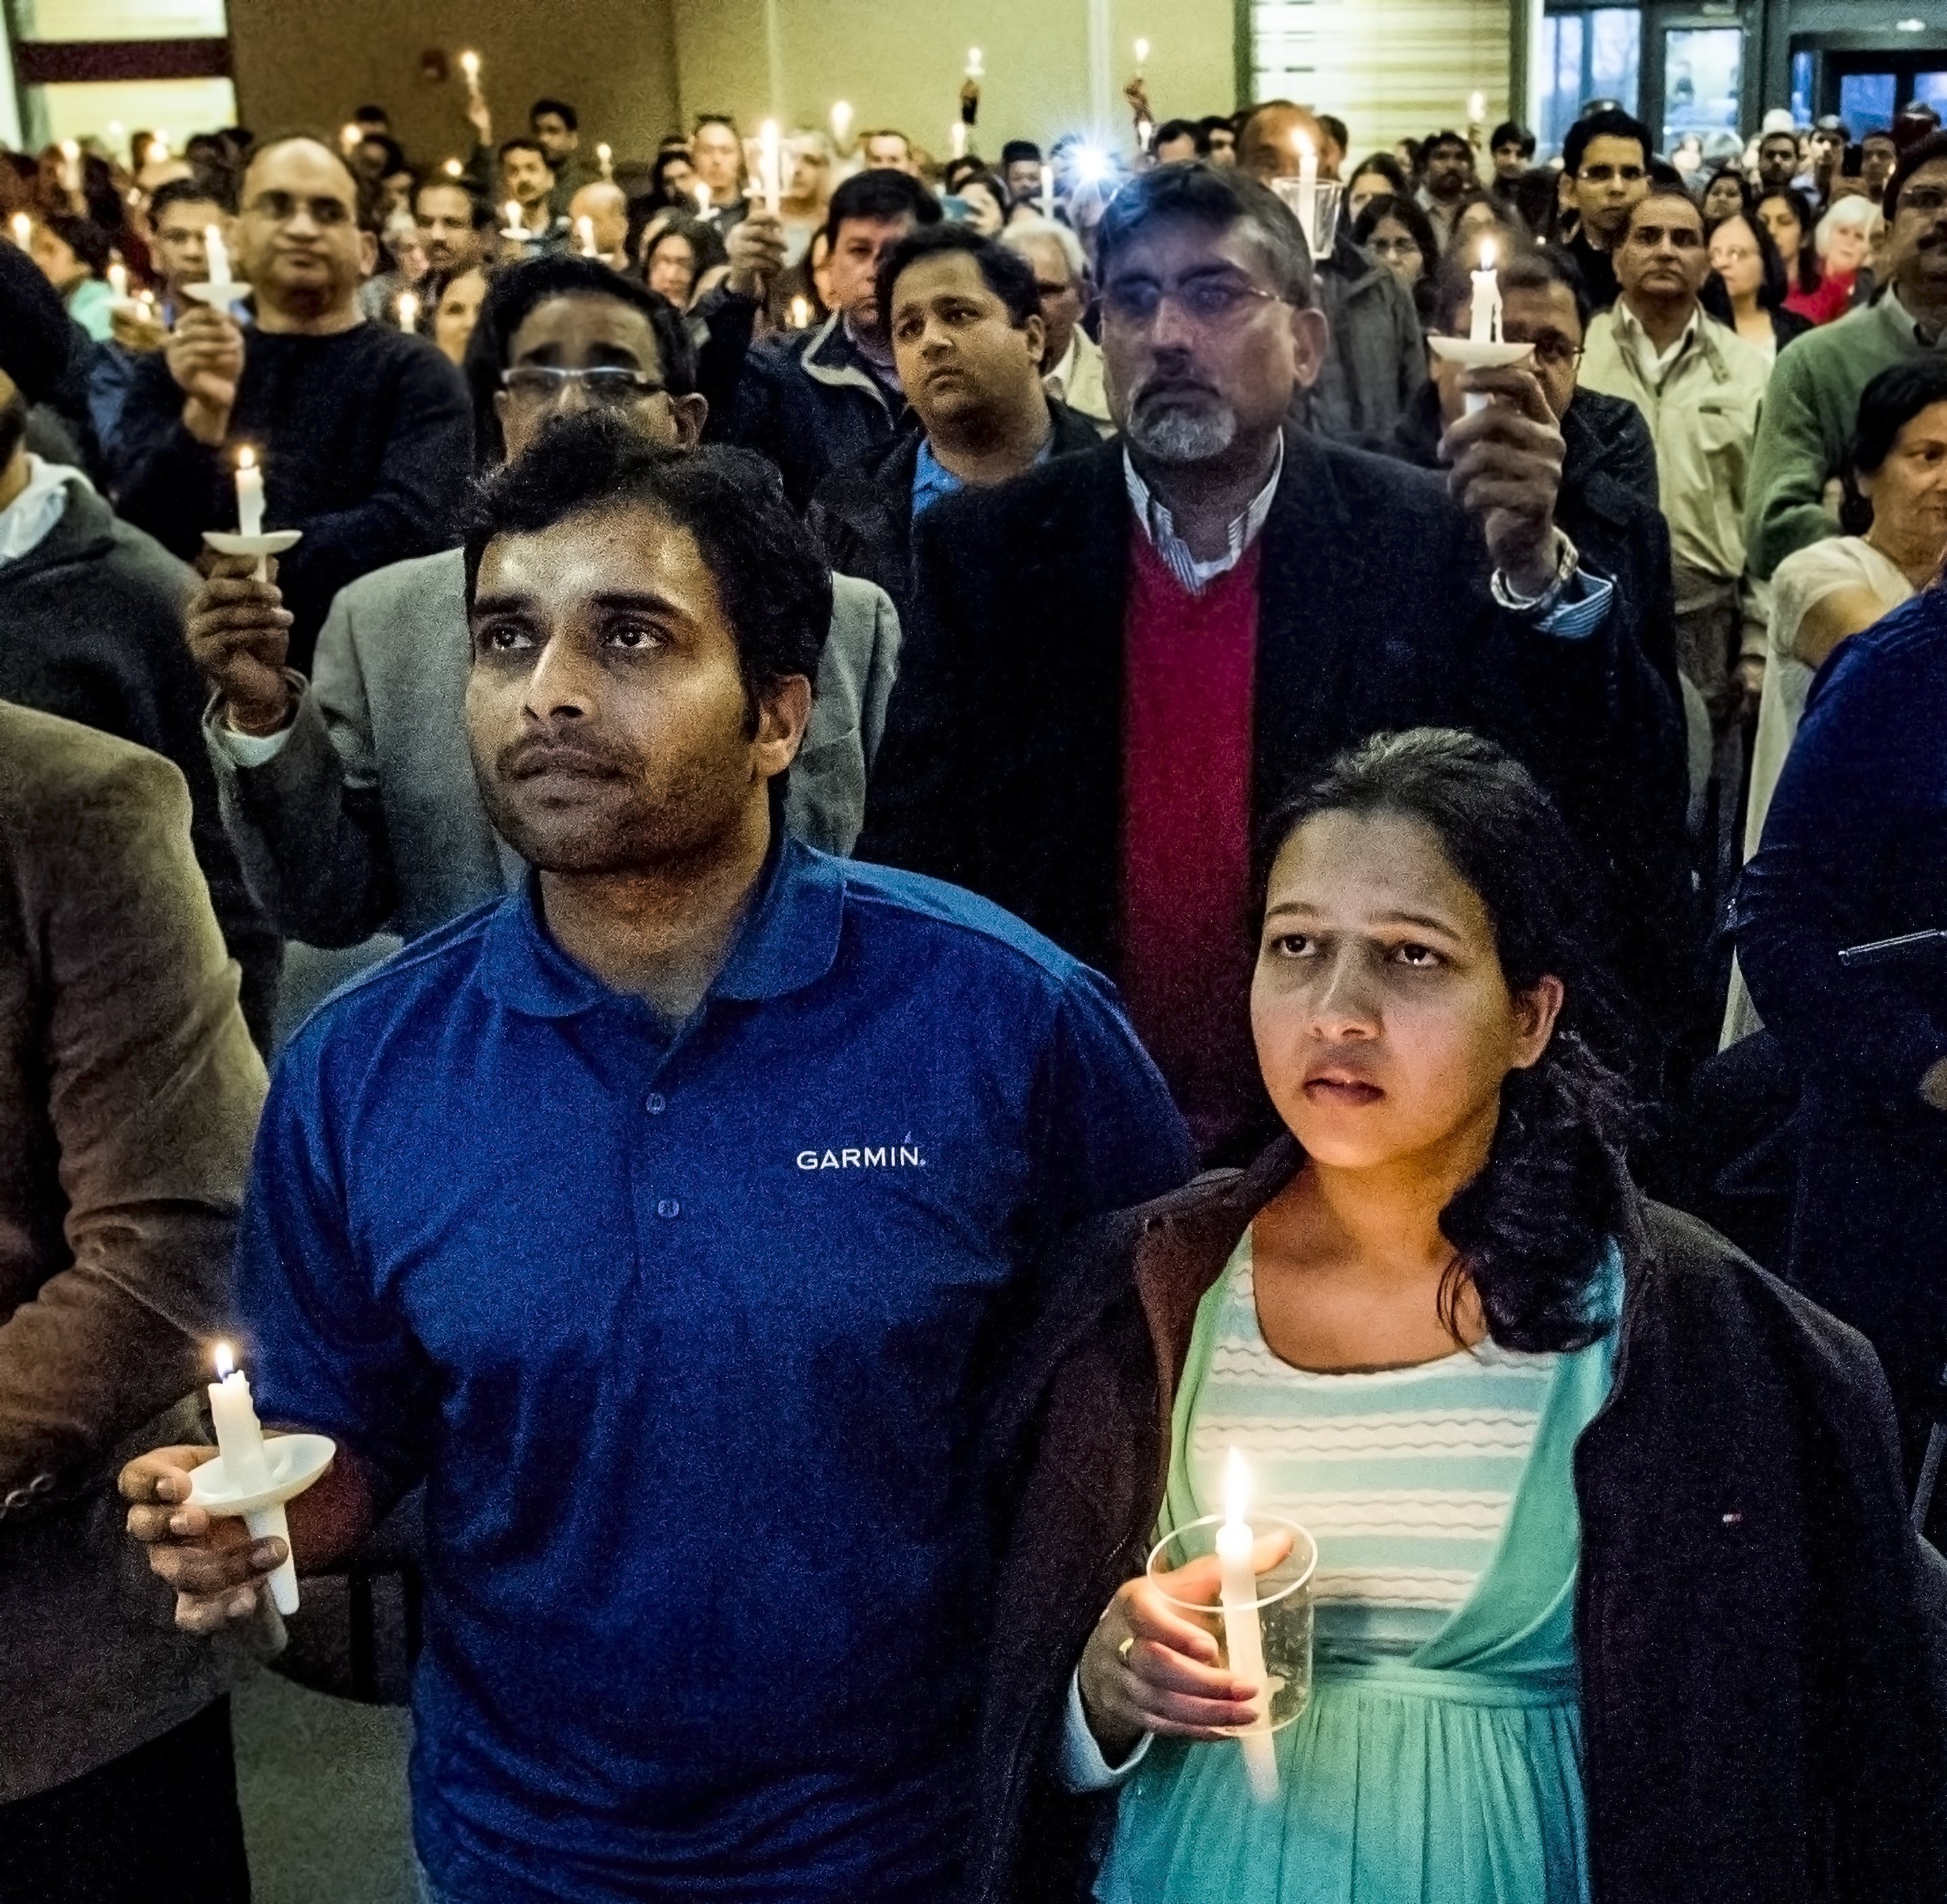 Alok Madasani, left, and his wife Reepthi Gangula hold candles during a vigil Sunday, Feb. 26, 2017, at the Ball Conference Center in Olathe, Kan., held in response to the deadly shooting Wednesday. Adam Purinton was arrested hours after the attack and accused of shooting two Indian immigrants and a third man at a bar, in what some believe was a hate crime. Alok Madasani was injured during the attack.